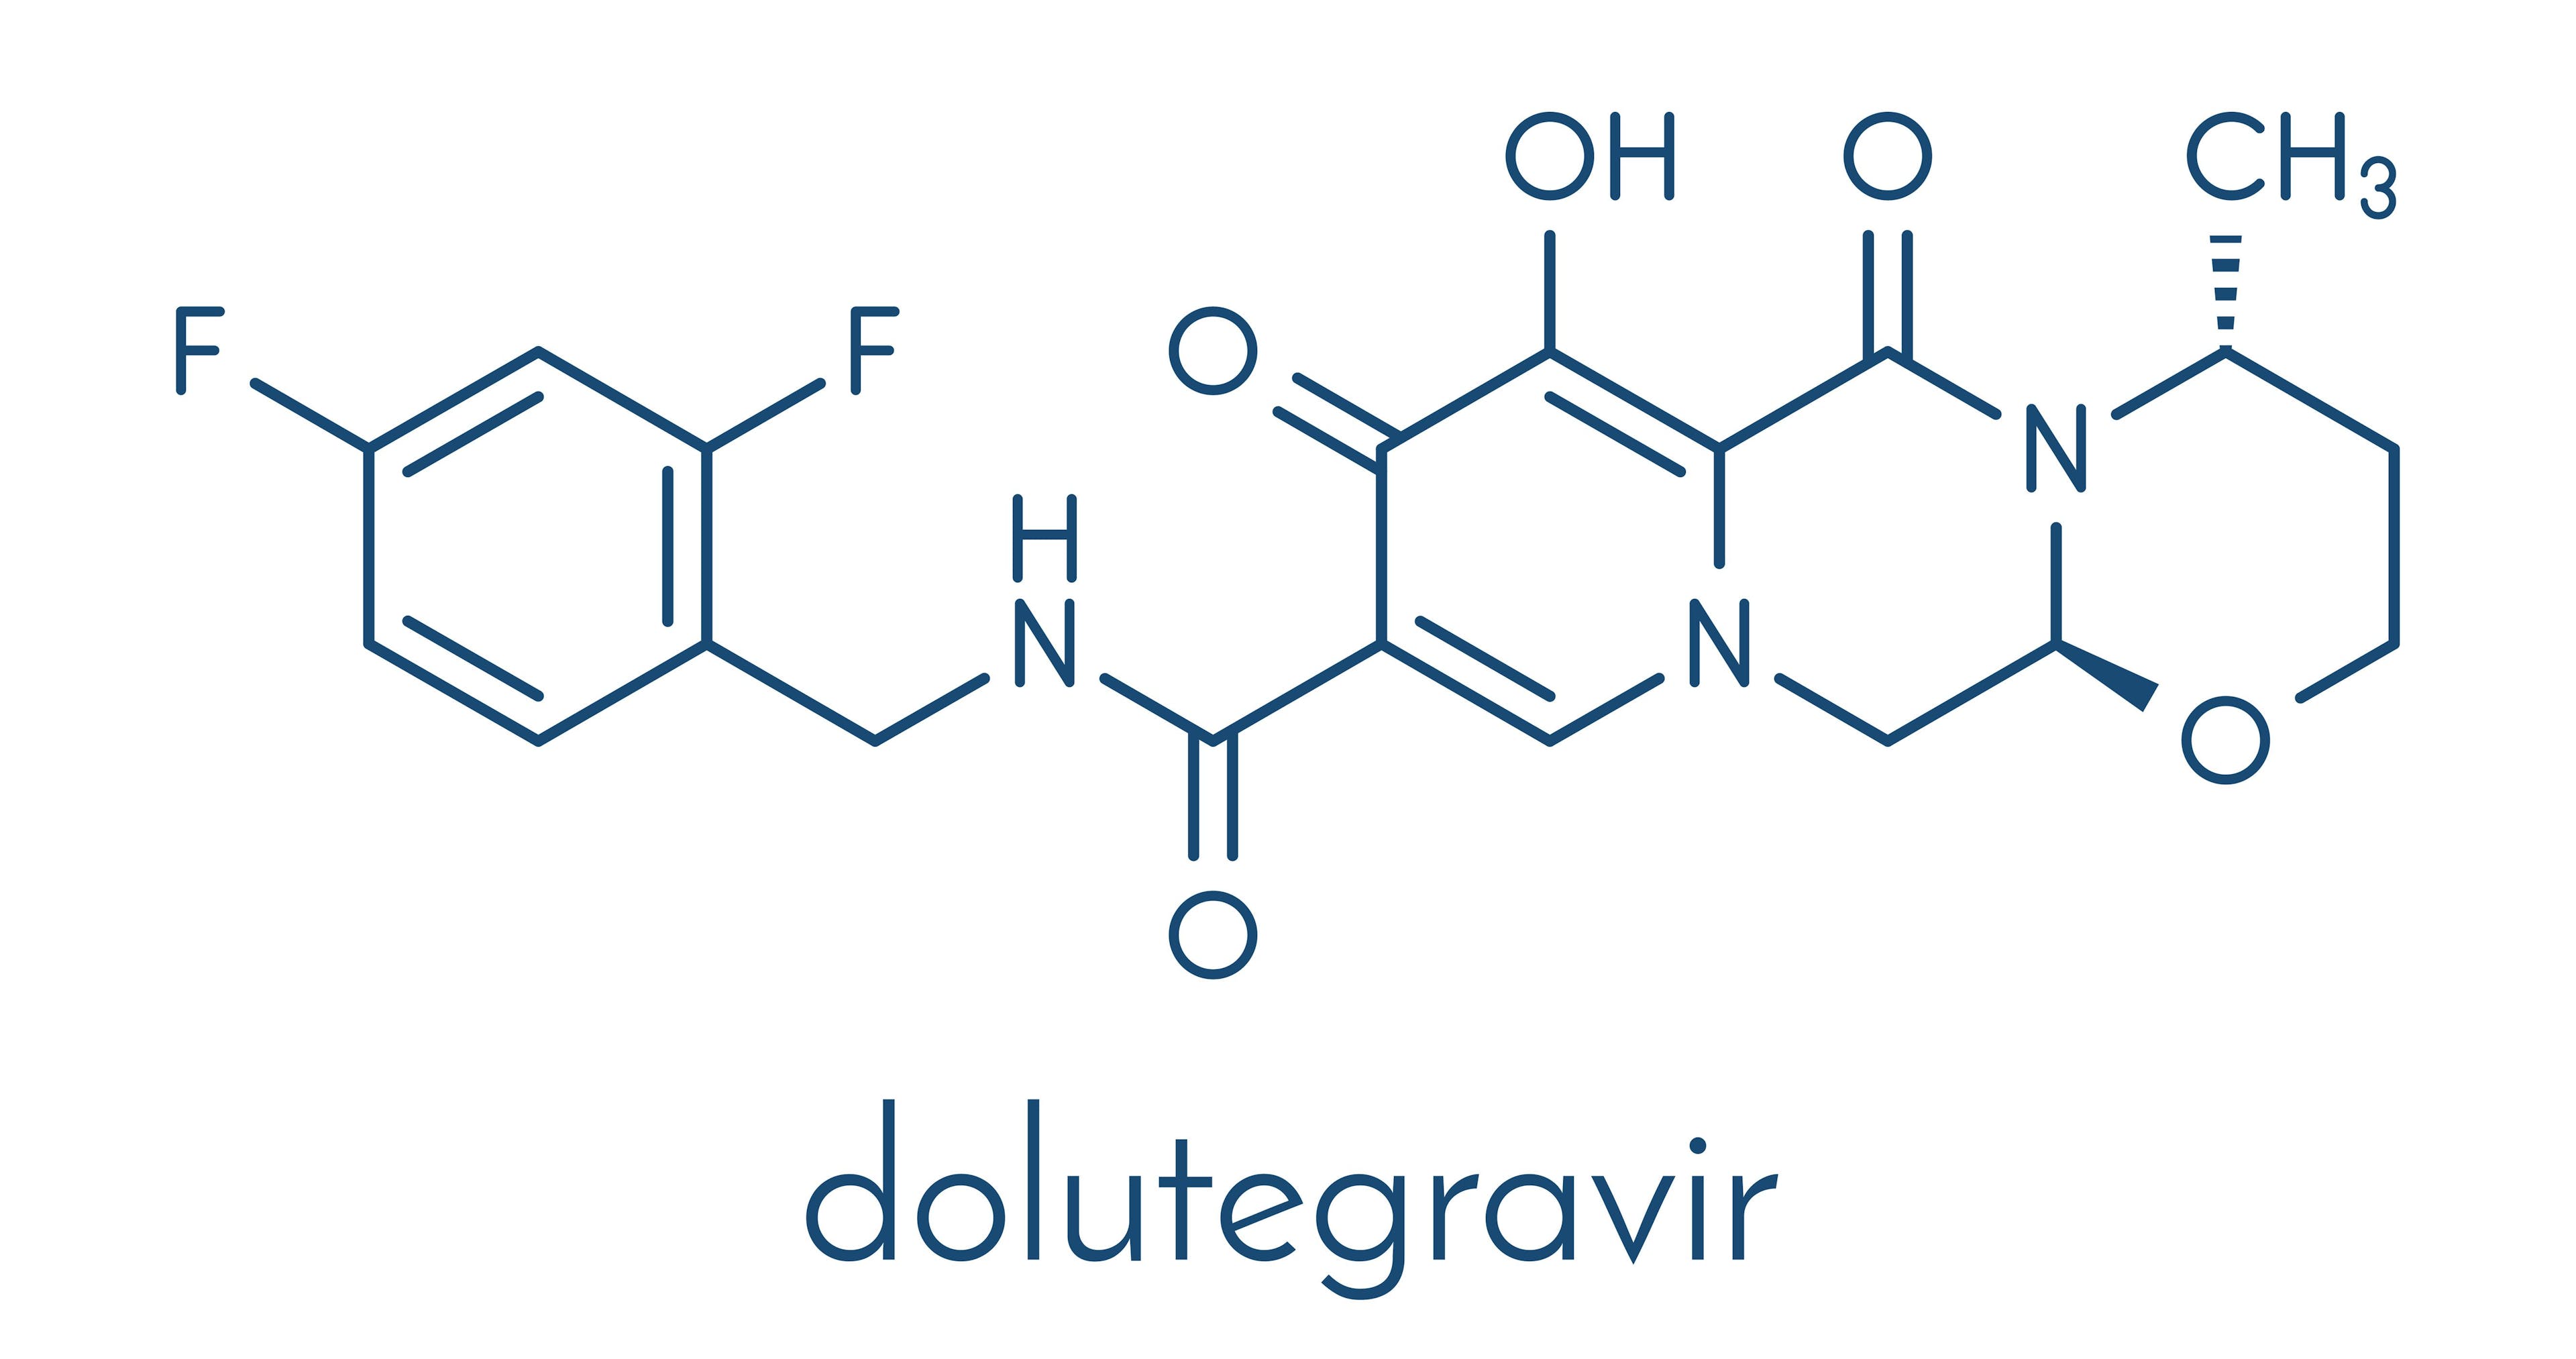 Pregnant people taking dolutegravir were more likely to achieve HIV viral suppression and less likely to have a preterm birth than participants using other forms of ART.